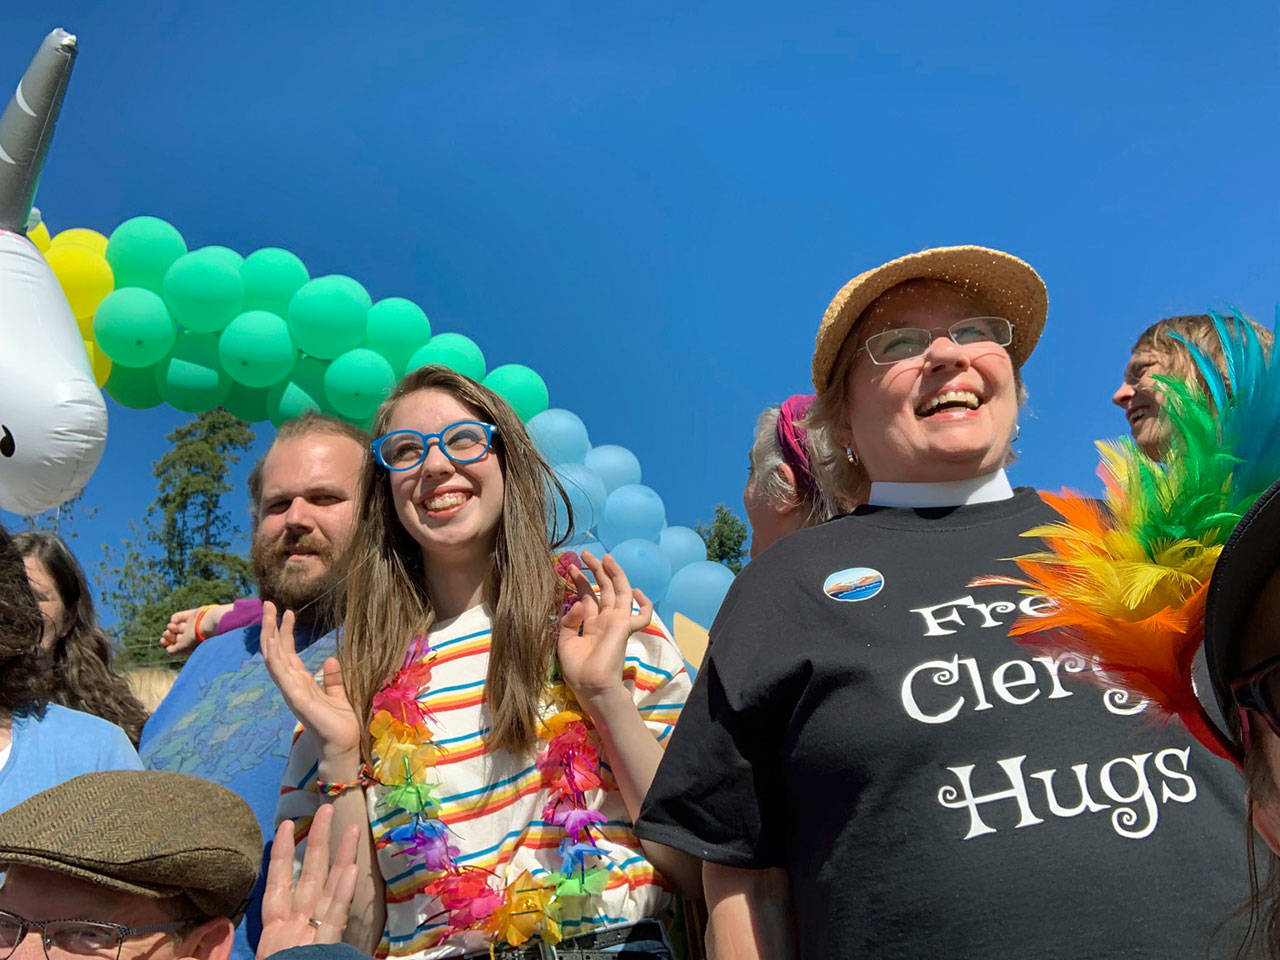 At the LGBTQ-supportive Langley Pride Picnic, community members gathered for food, music, art crafts and dancing. Above, St. Stephen’s Episcopal Oak Harbor’s Rev. Diana Peters wears a shirt that says “free Clergy hugs.” (Photos provided)